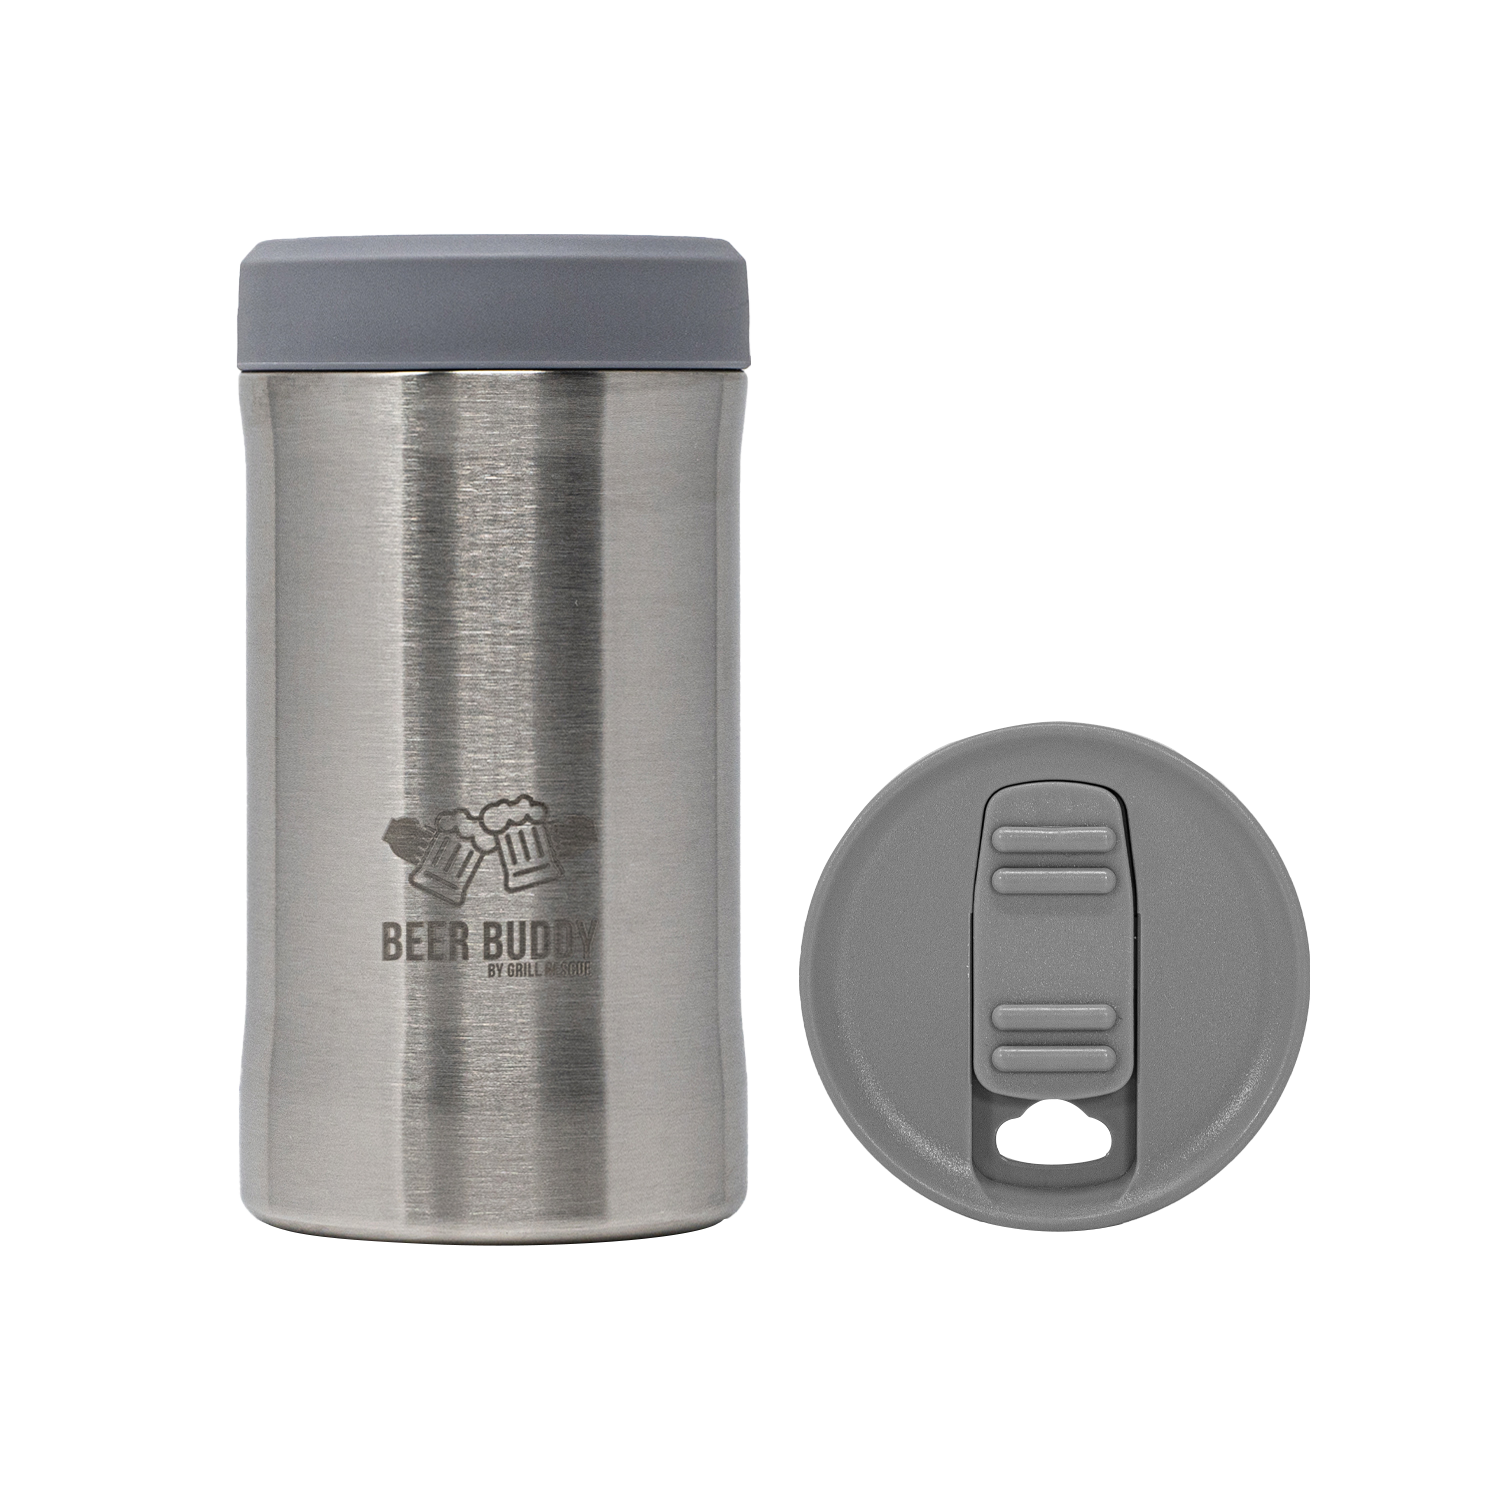 Universal Buddy | Alabama - Holds 12oz Cans, Slim Cans, Bottles, 16oz Cans & Bottles - Keep Your Drink Cold for 12+ Hours | Frost Buddy